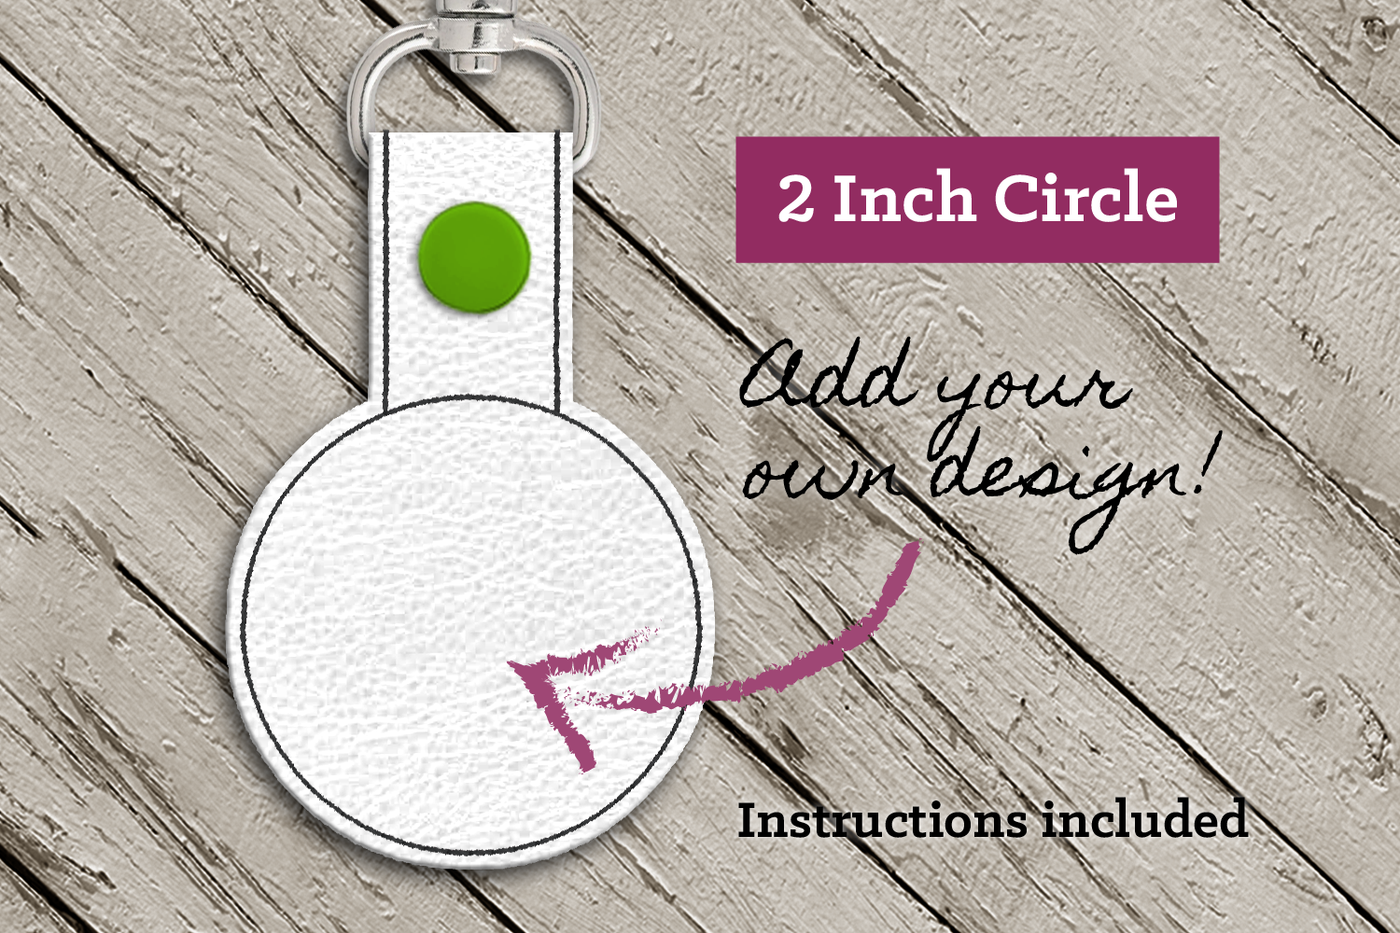 2 inch circle key fob blank design. Add your own design! Instructions included.